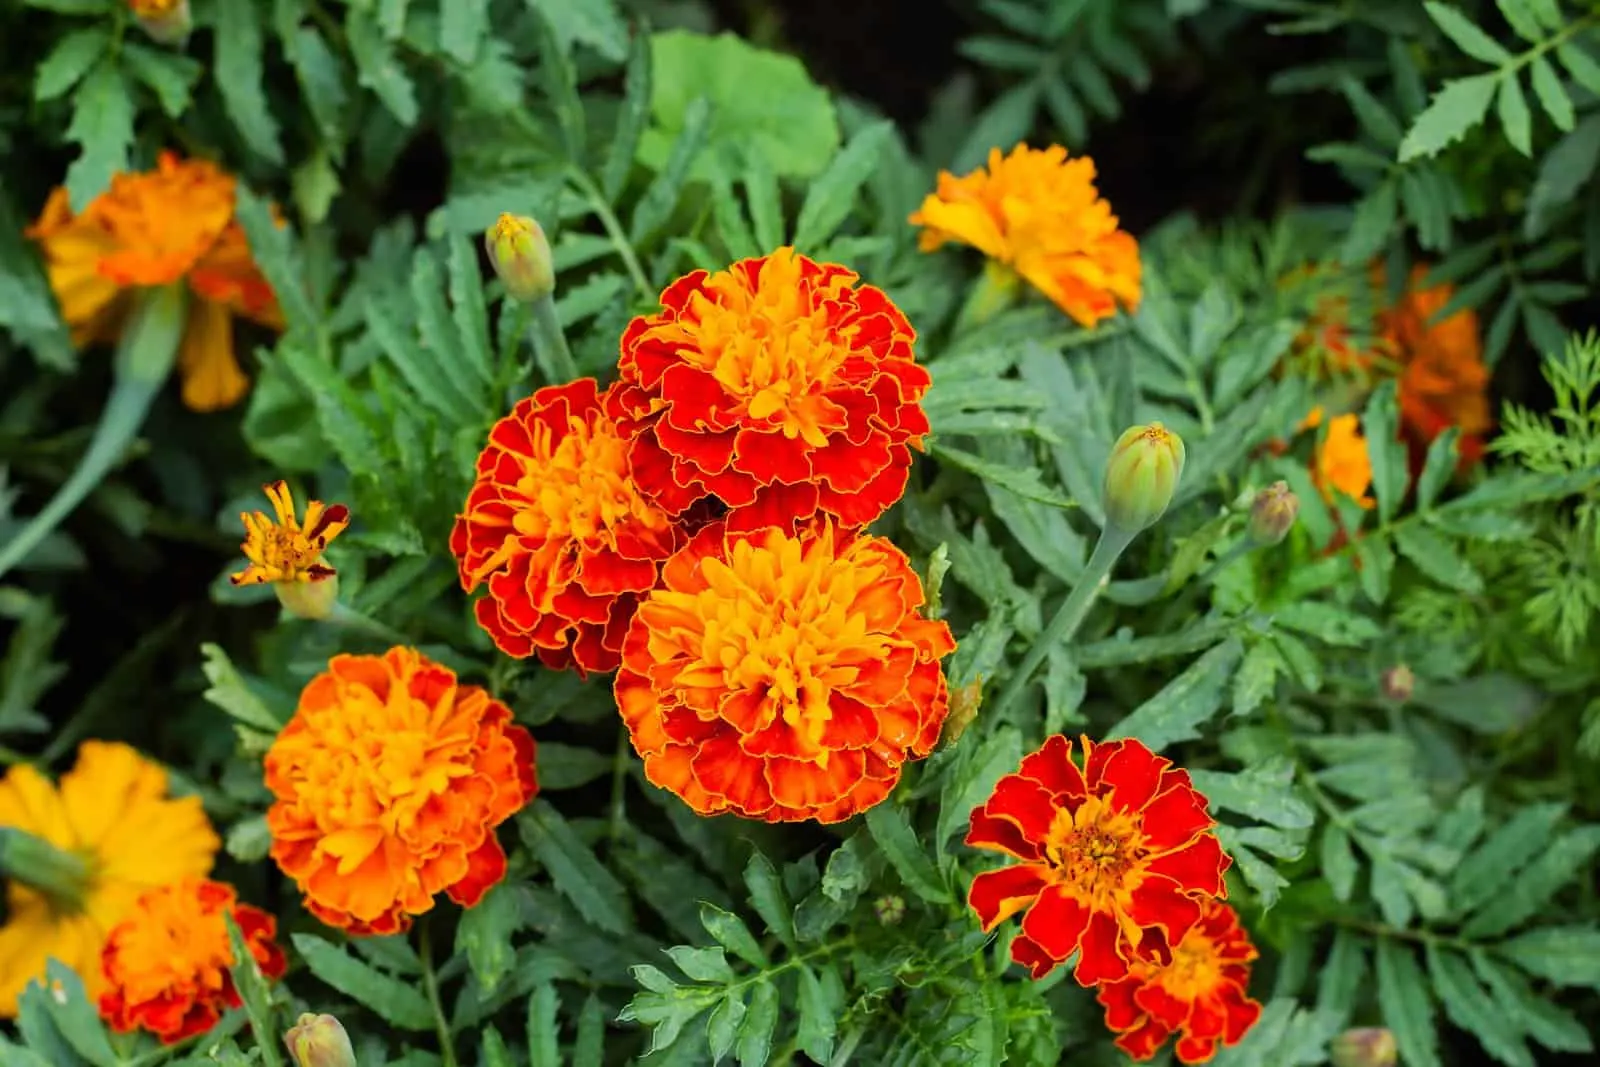 Marigolds are blooming beautifully